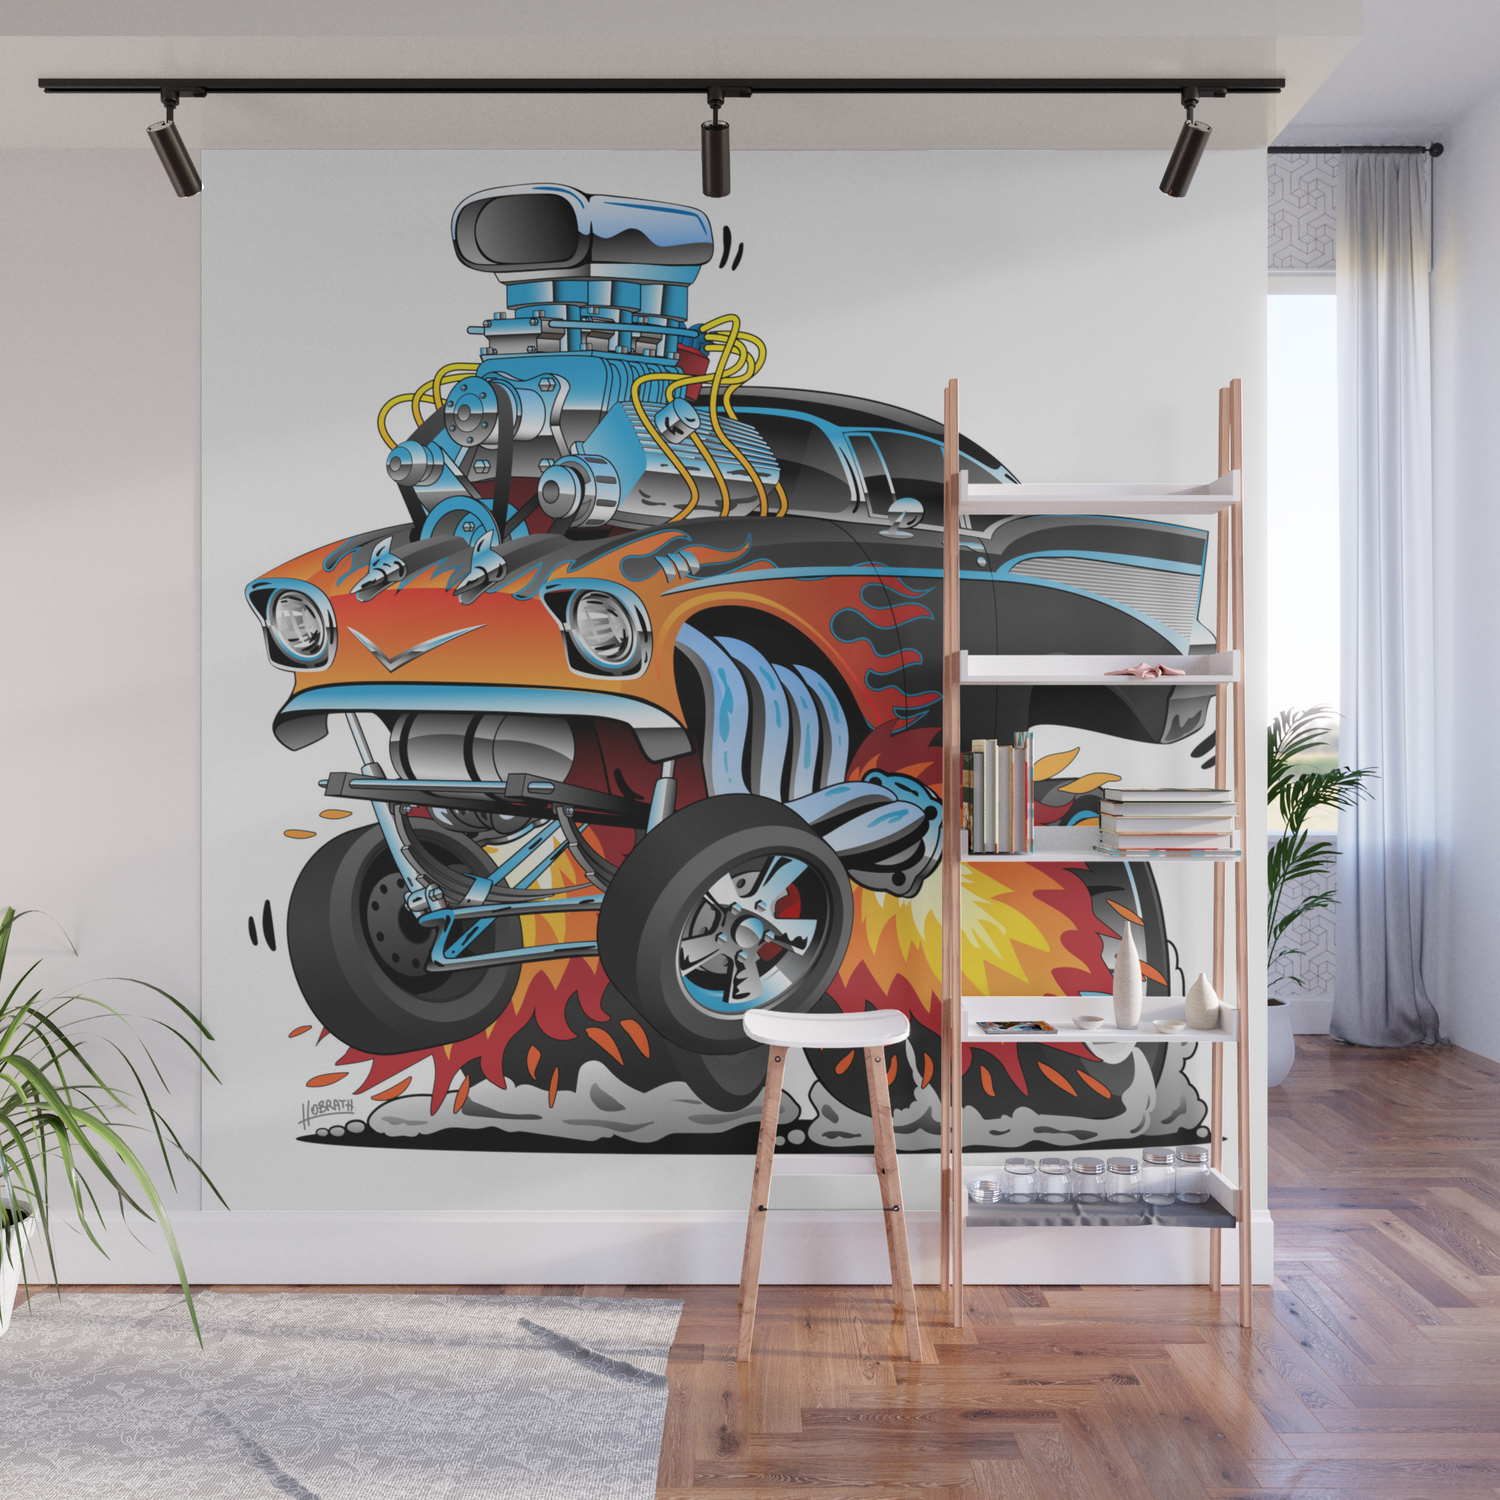 FAST FUN HOT ROD Speed Racer RACE CARS Boys Room WALL DECALS STICKERS APPLIQUES